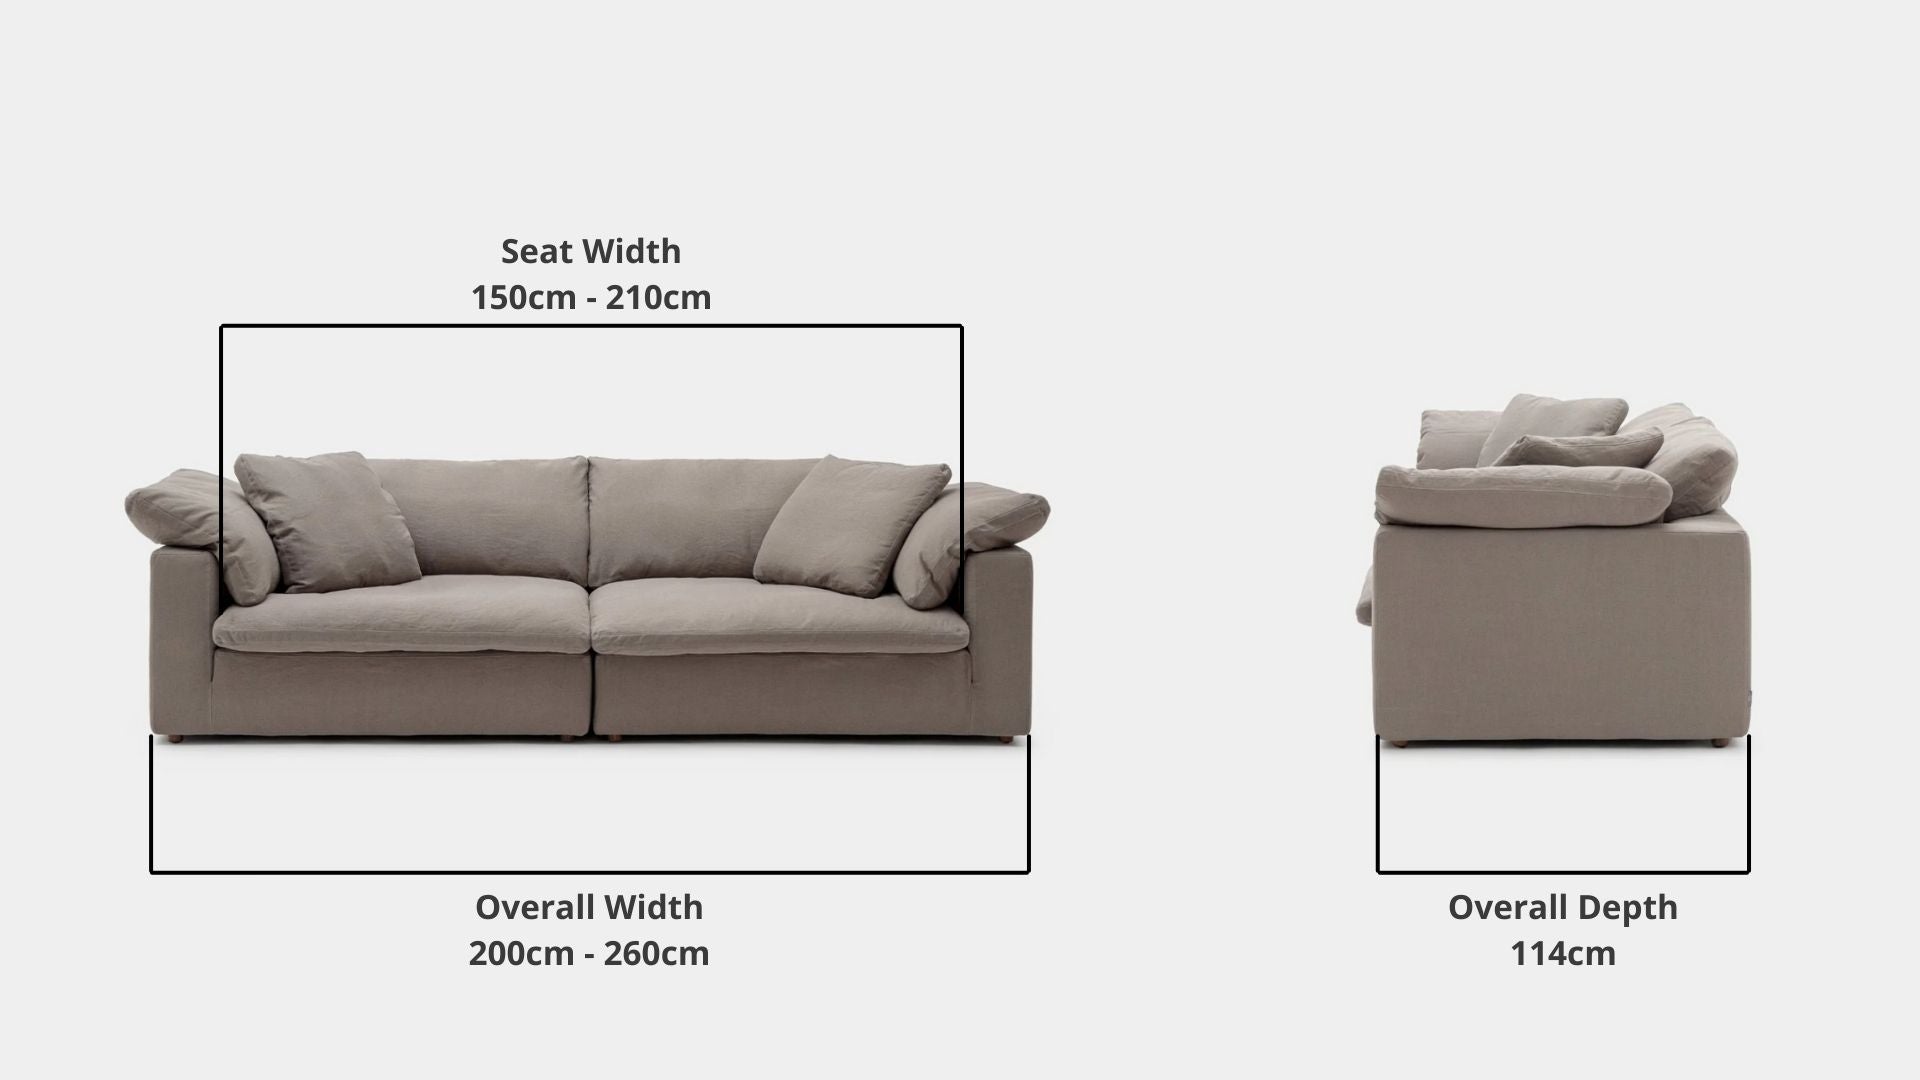 Details the key dimensions in terms of overall width, overall depth and seat width for Cloud Fabric Sofa